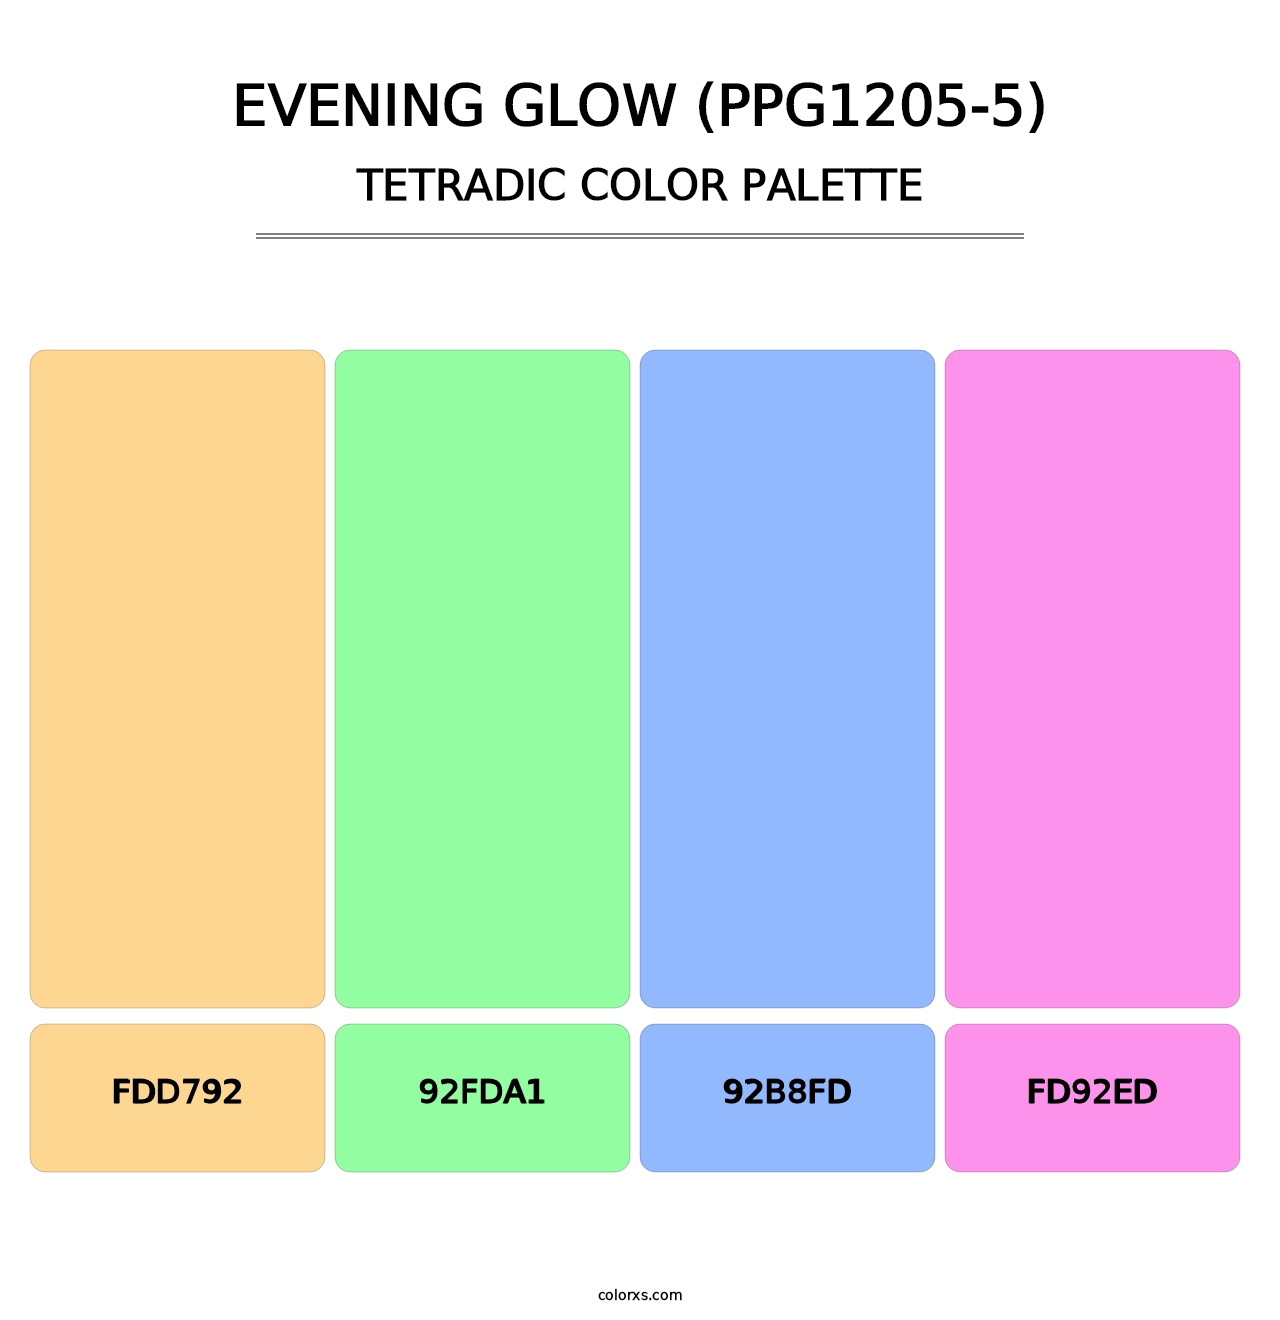 Evening Glow (PPG1205-5) - Tetradic Color Palette